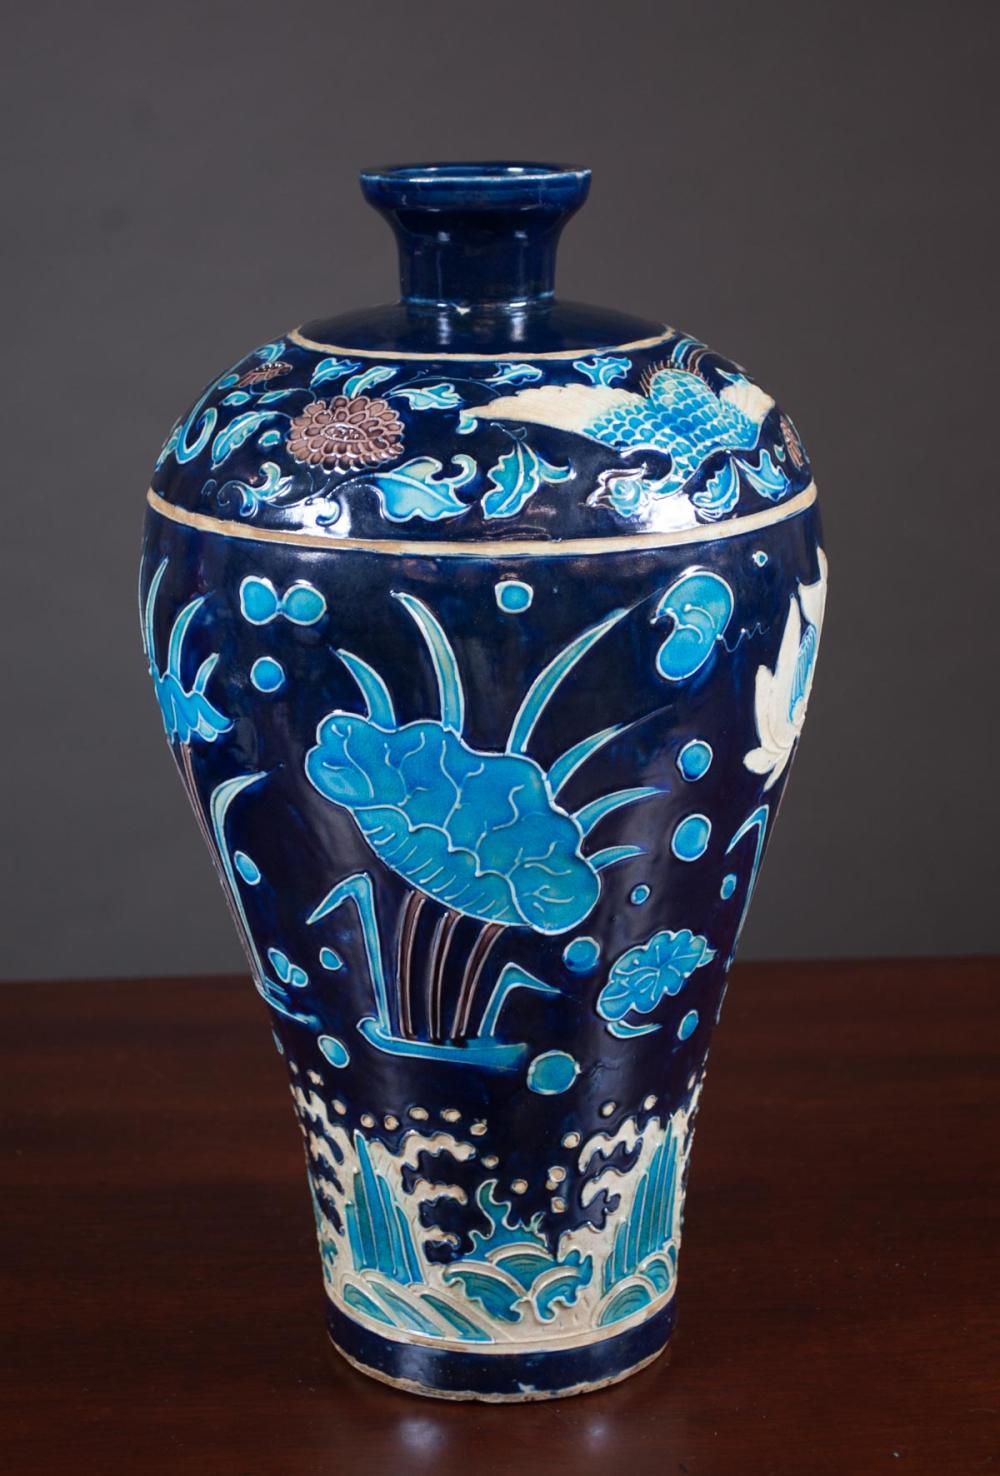 CHINESE FAHUA PORCELAIN VASE ATTRIBUTED 315a7d